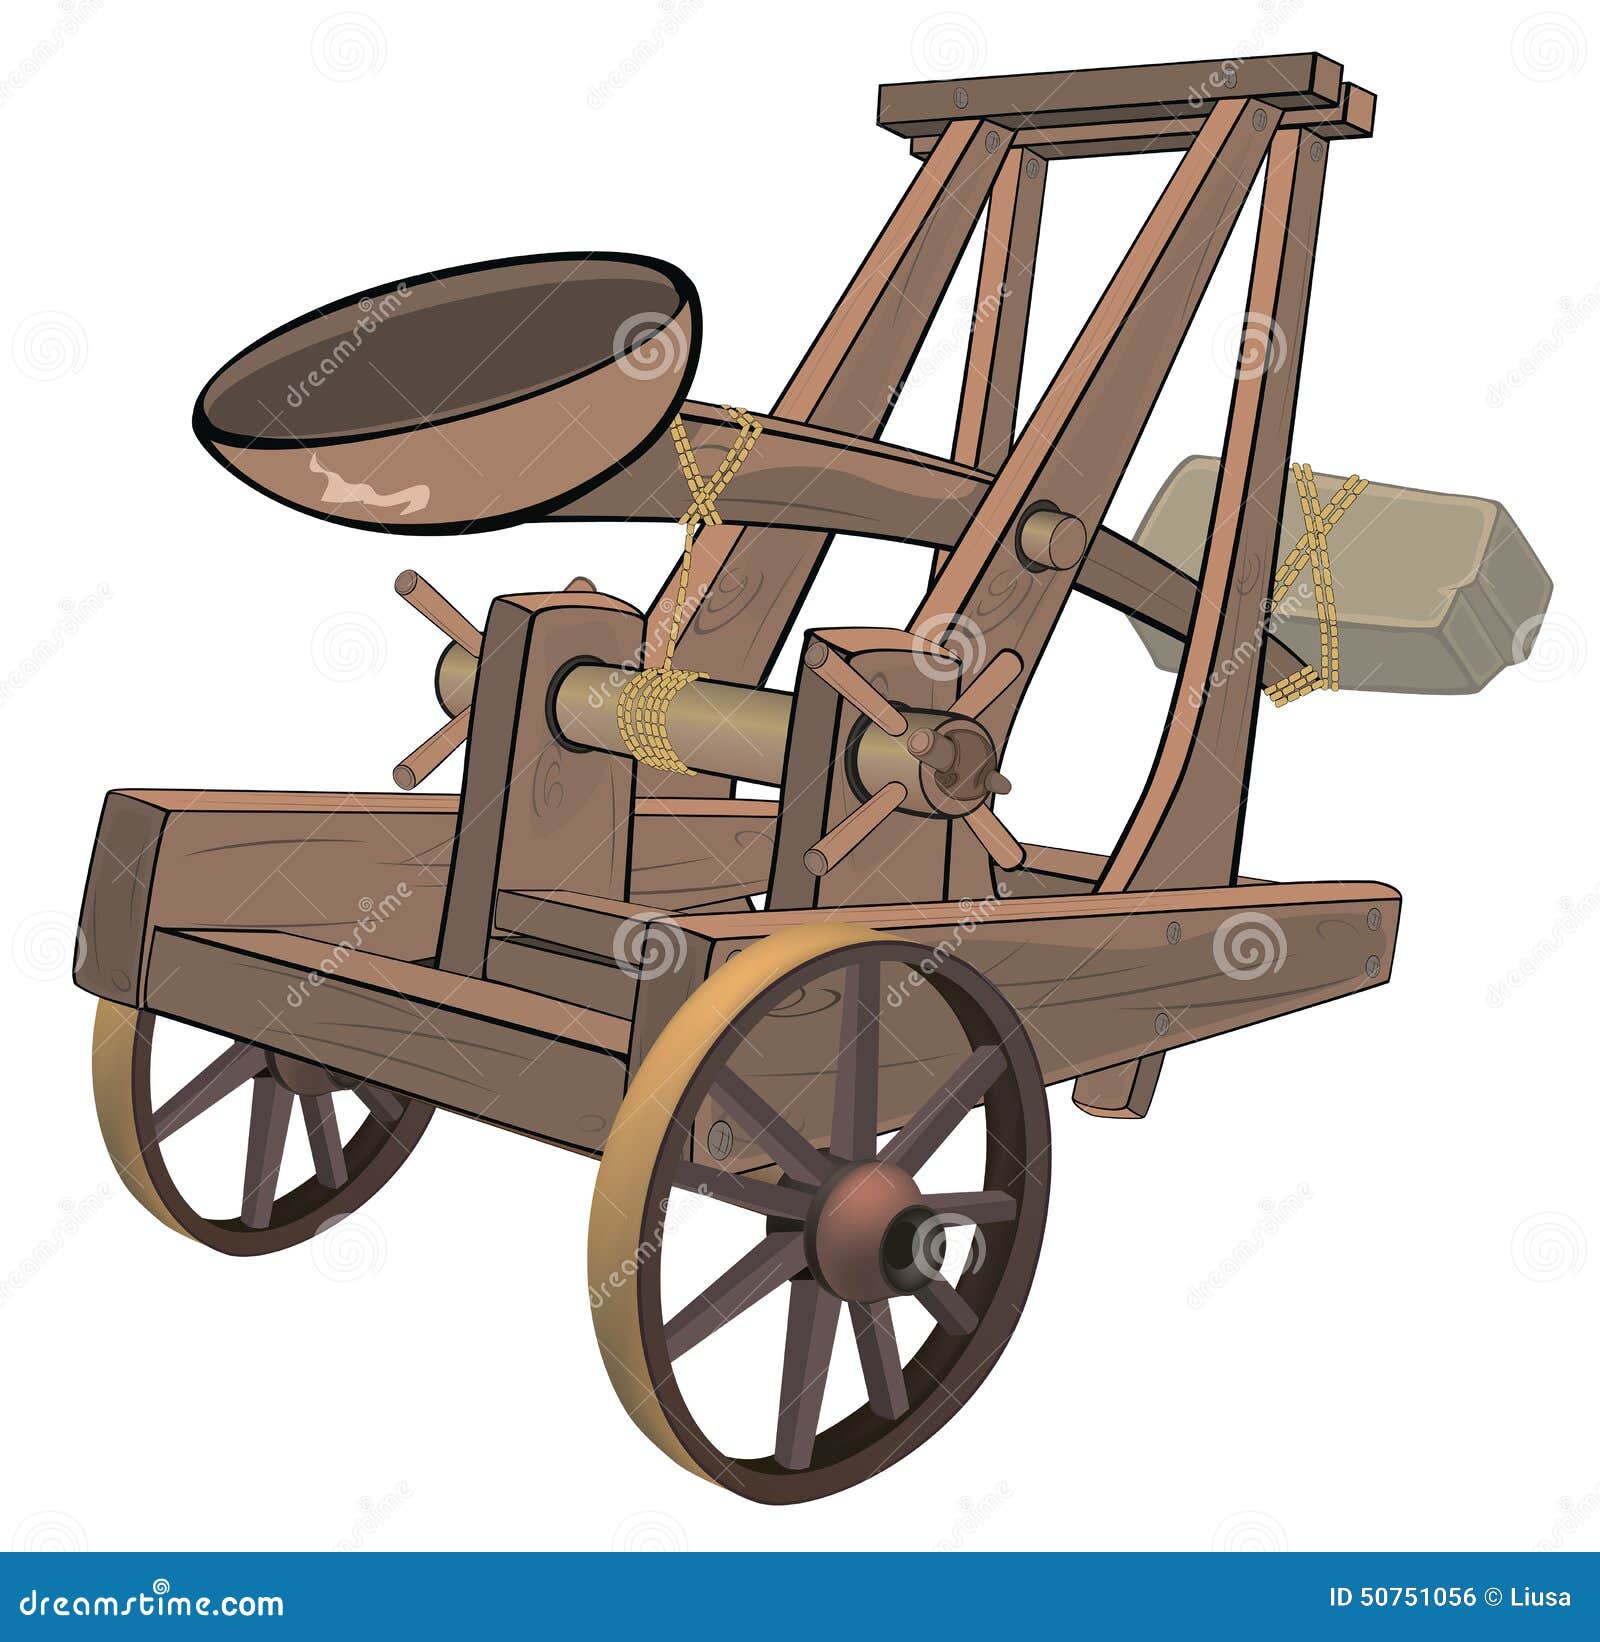 a video game object:catapult